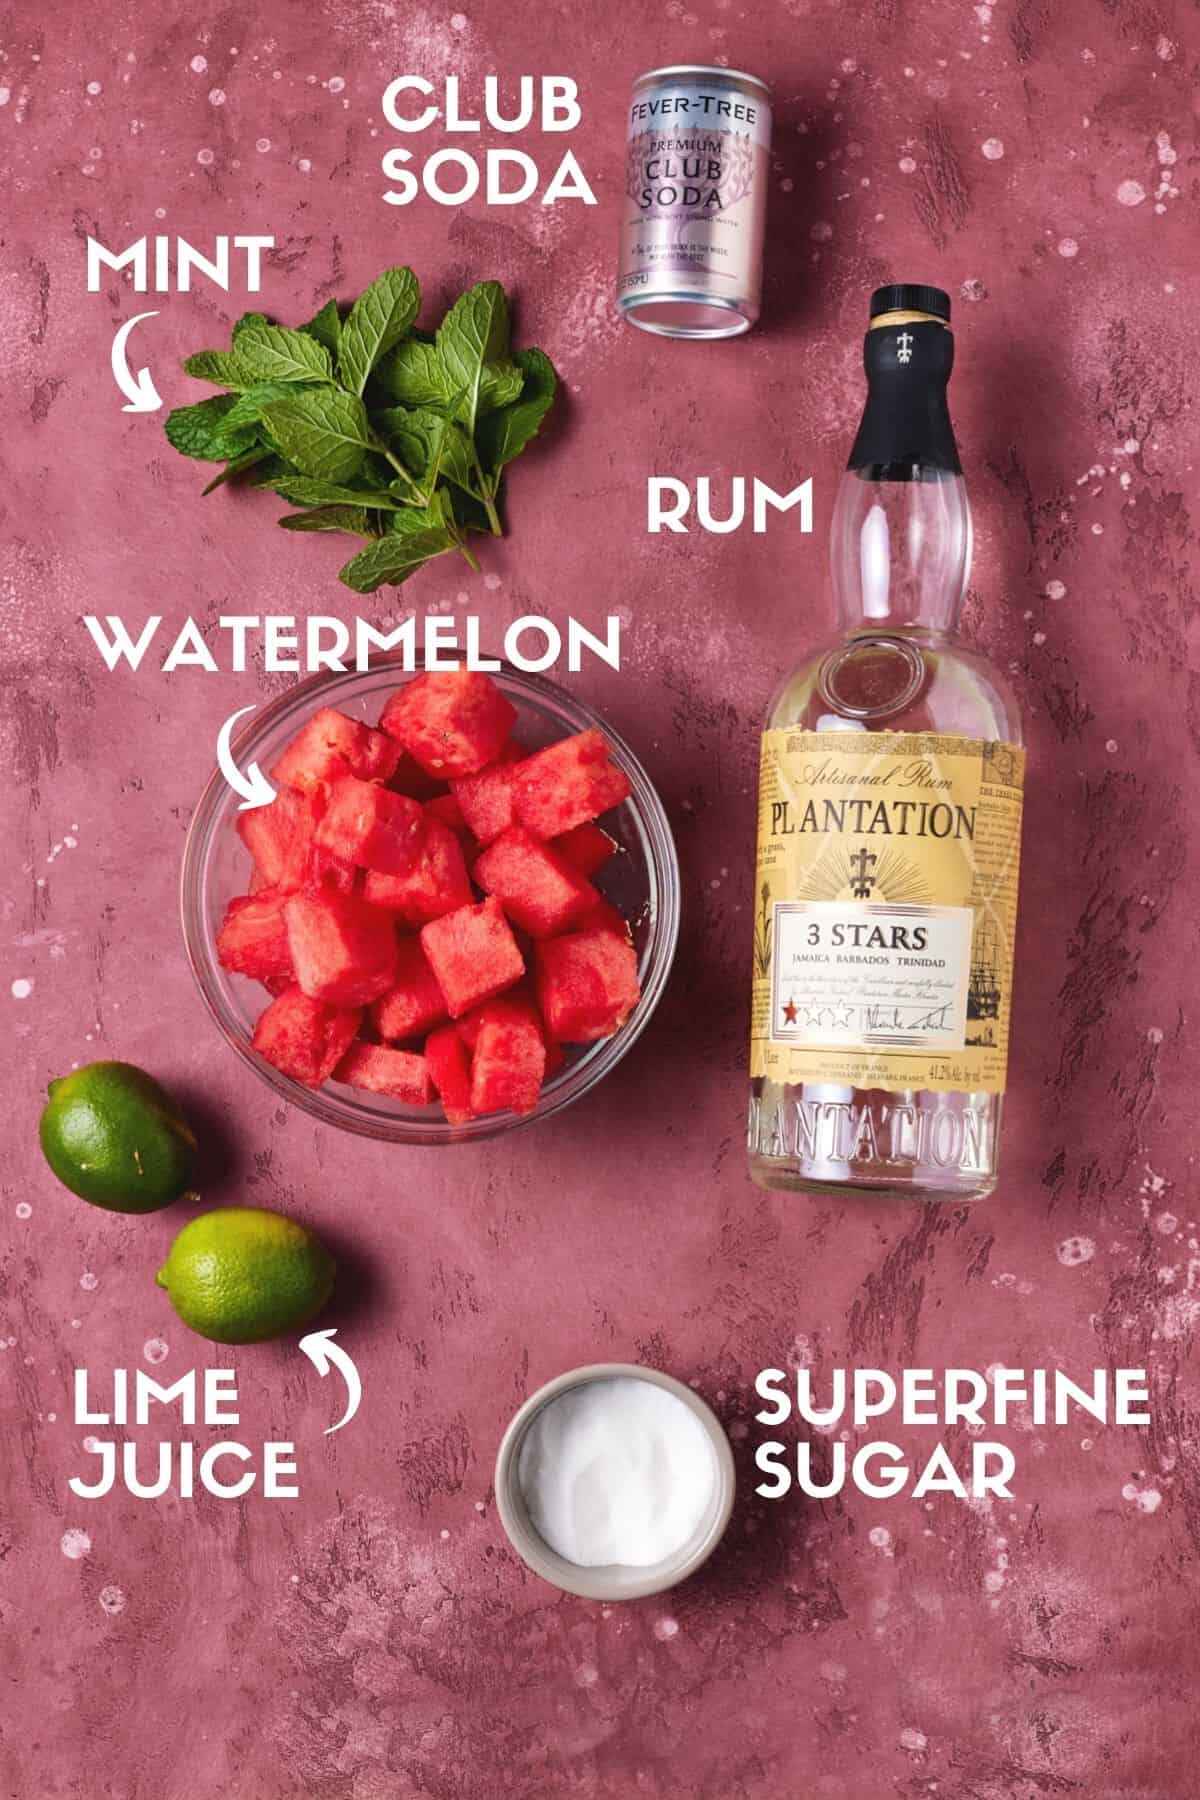 Bottle of rum, watermelon cubes, sugar, limes and club soda for mojito. 